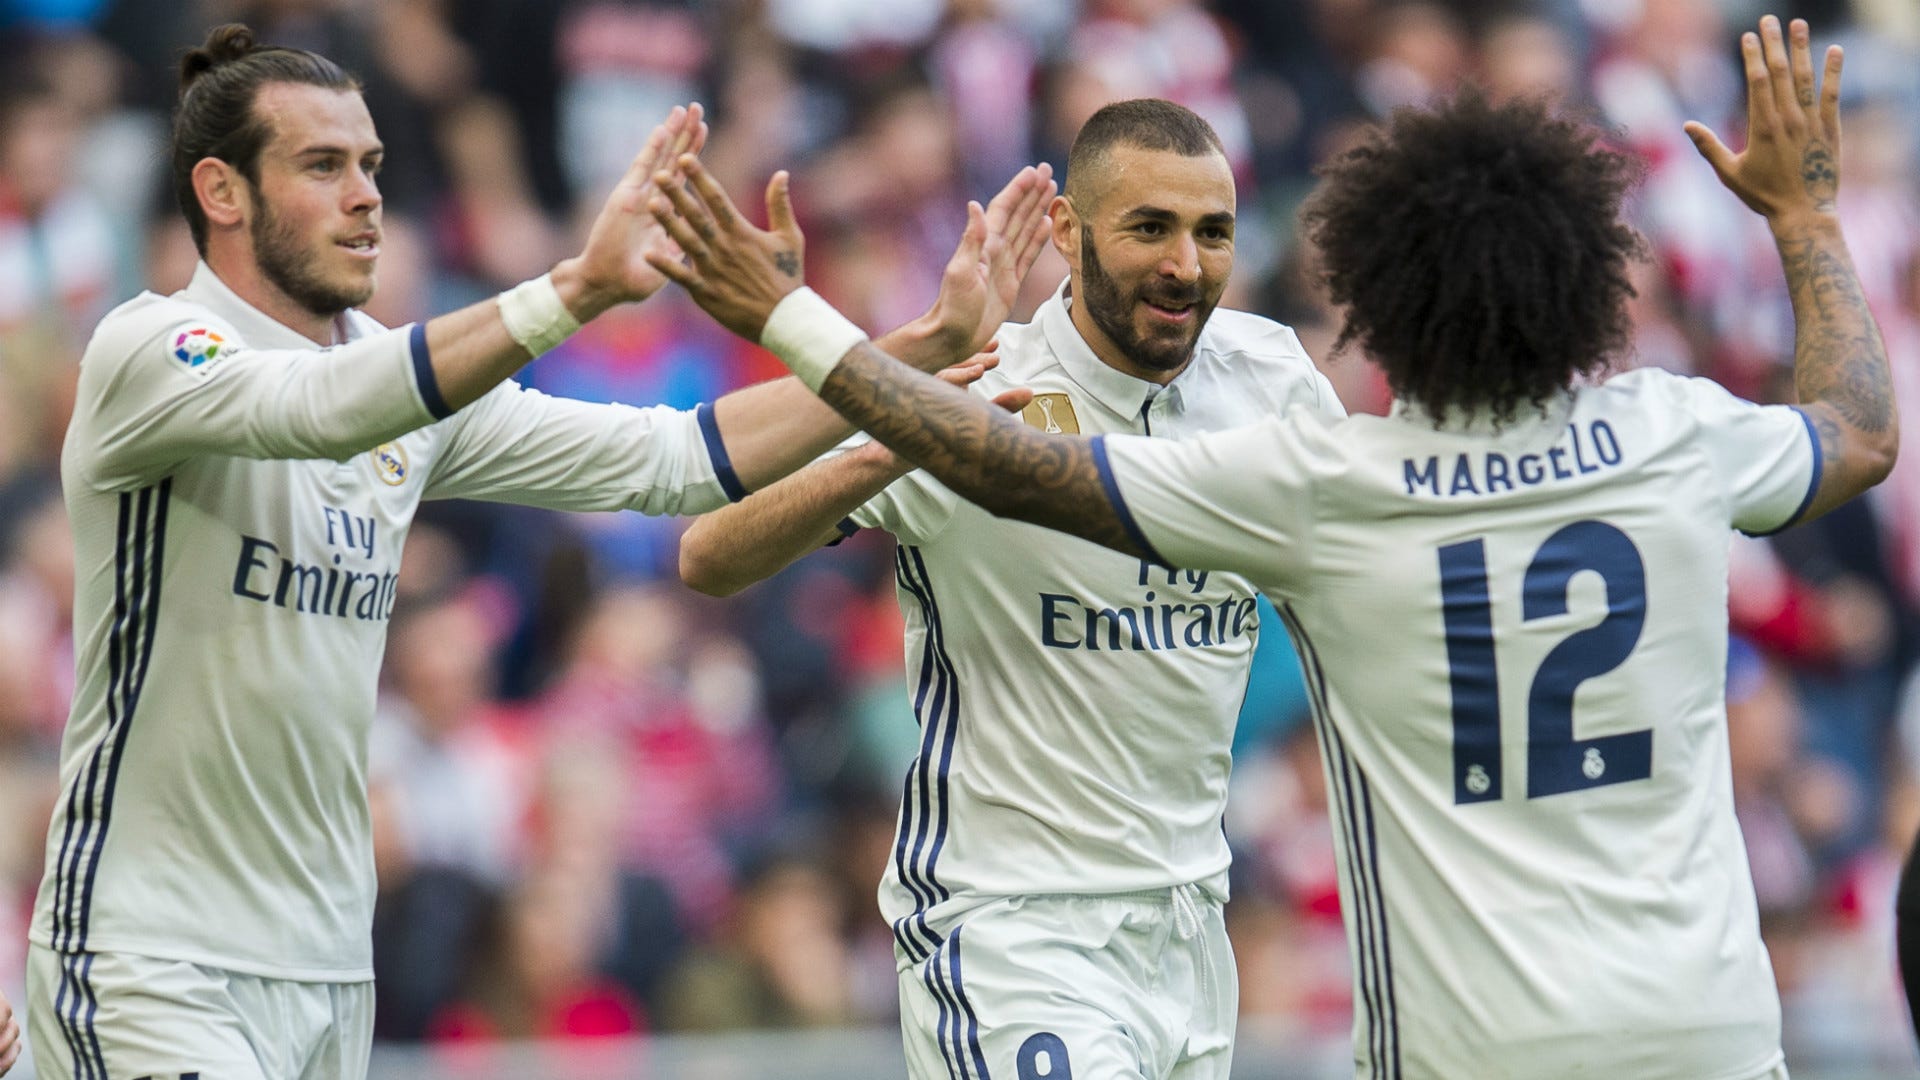 La Liga results Scores and table for Week 28 as Real Madrid seal important win Goal Cameroon